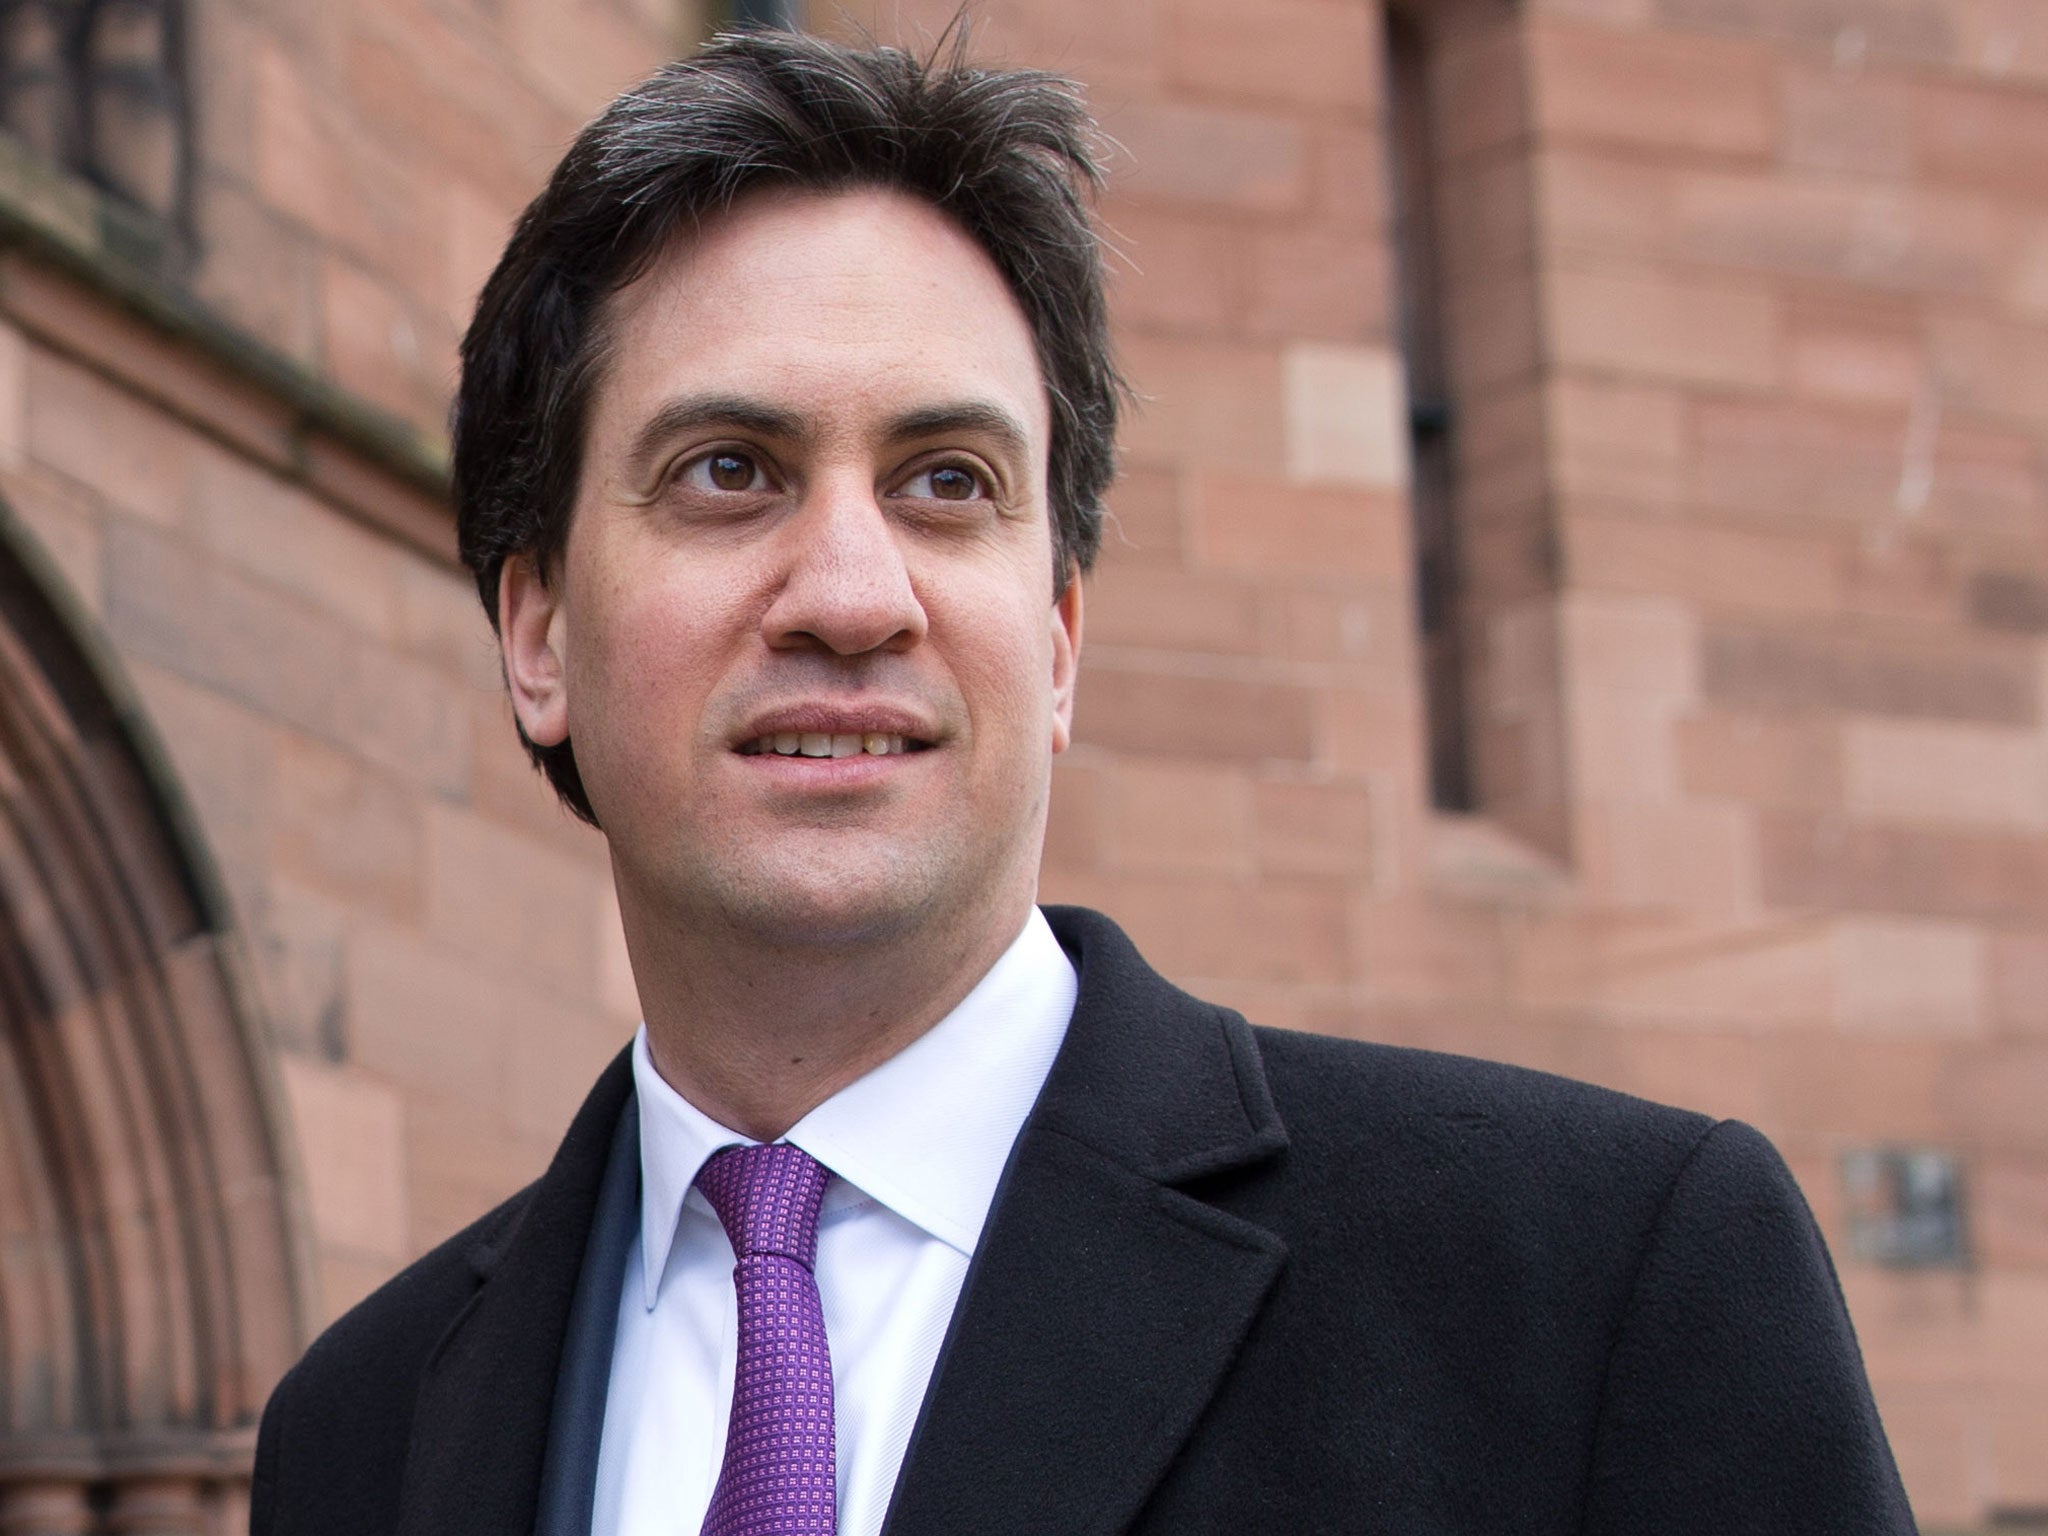 Mr Miliband said the Coalition's 2015-16 budget would be the 'starting point' for a three-year cap on social security spending imposed by the next Labour government